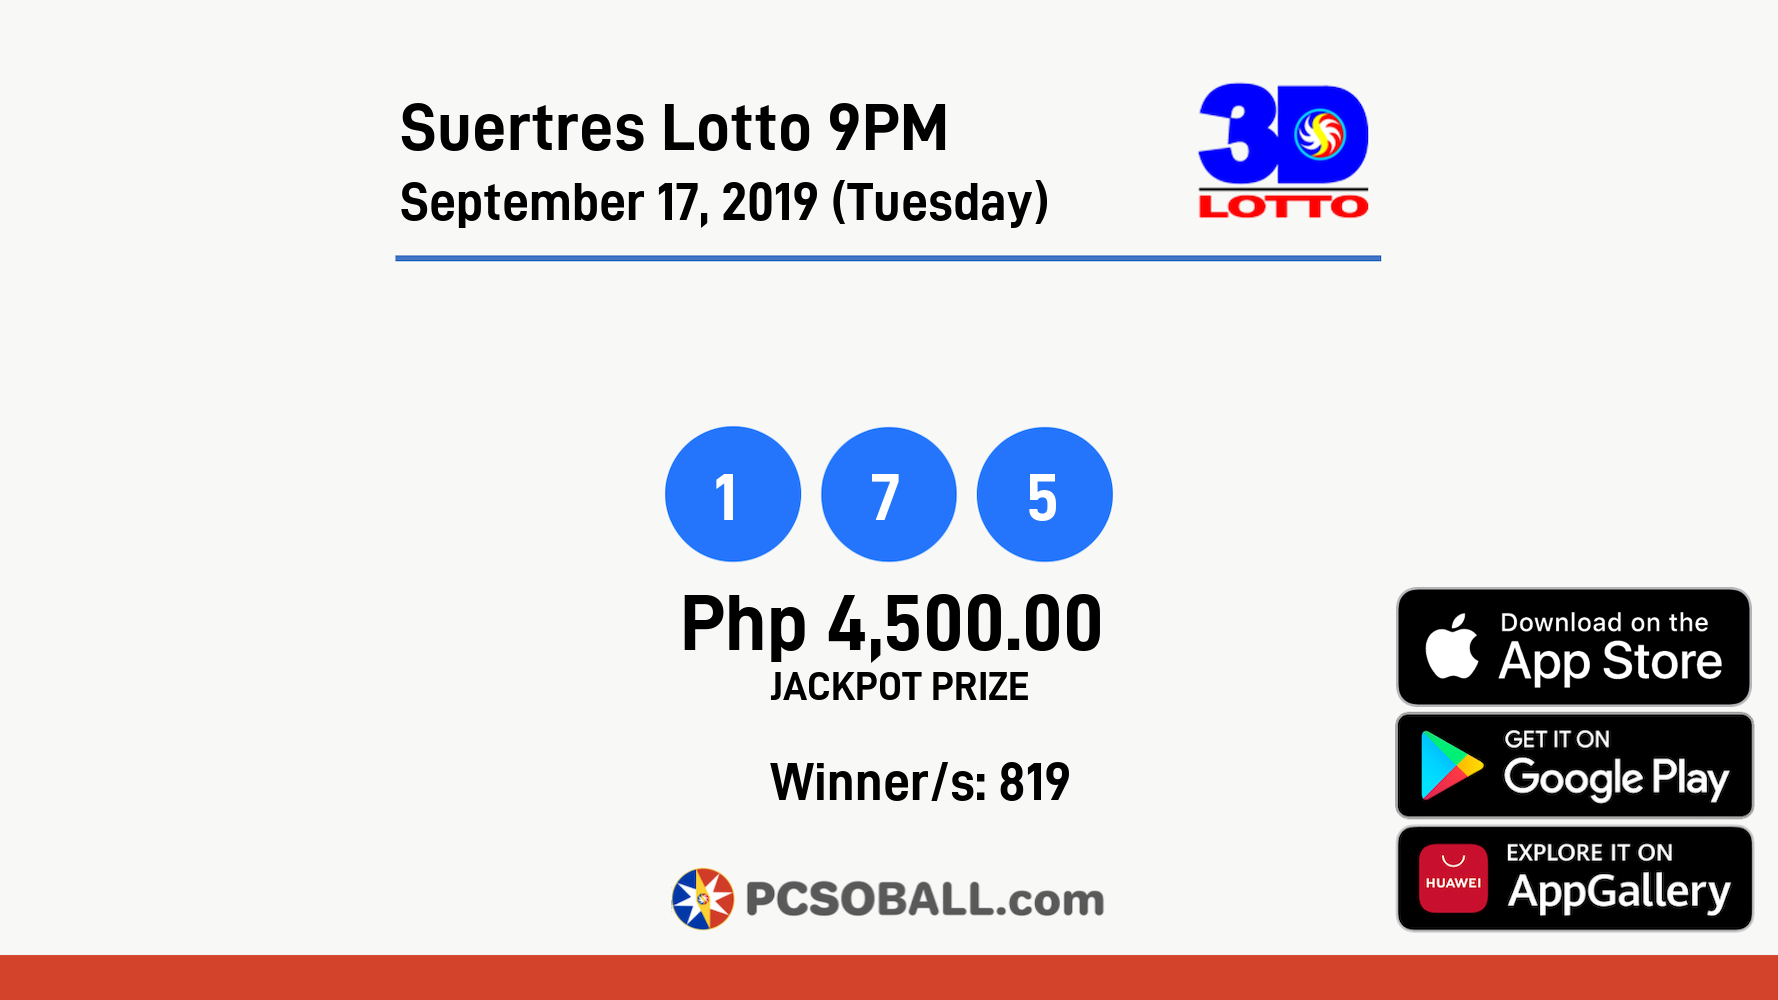 Suertres Lotto 9PM September 17, 2019 (Tuesday) Result